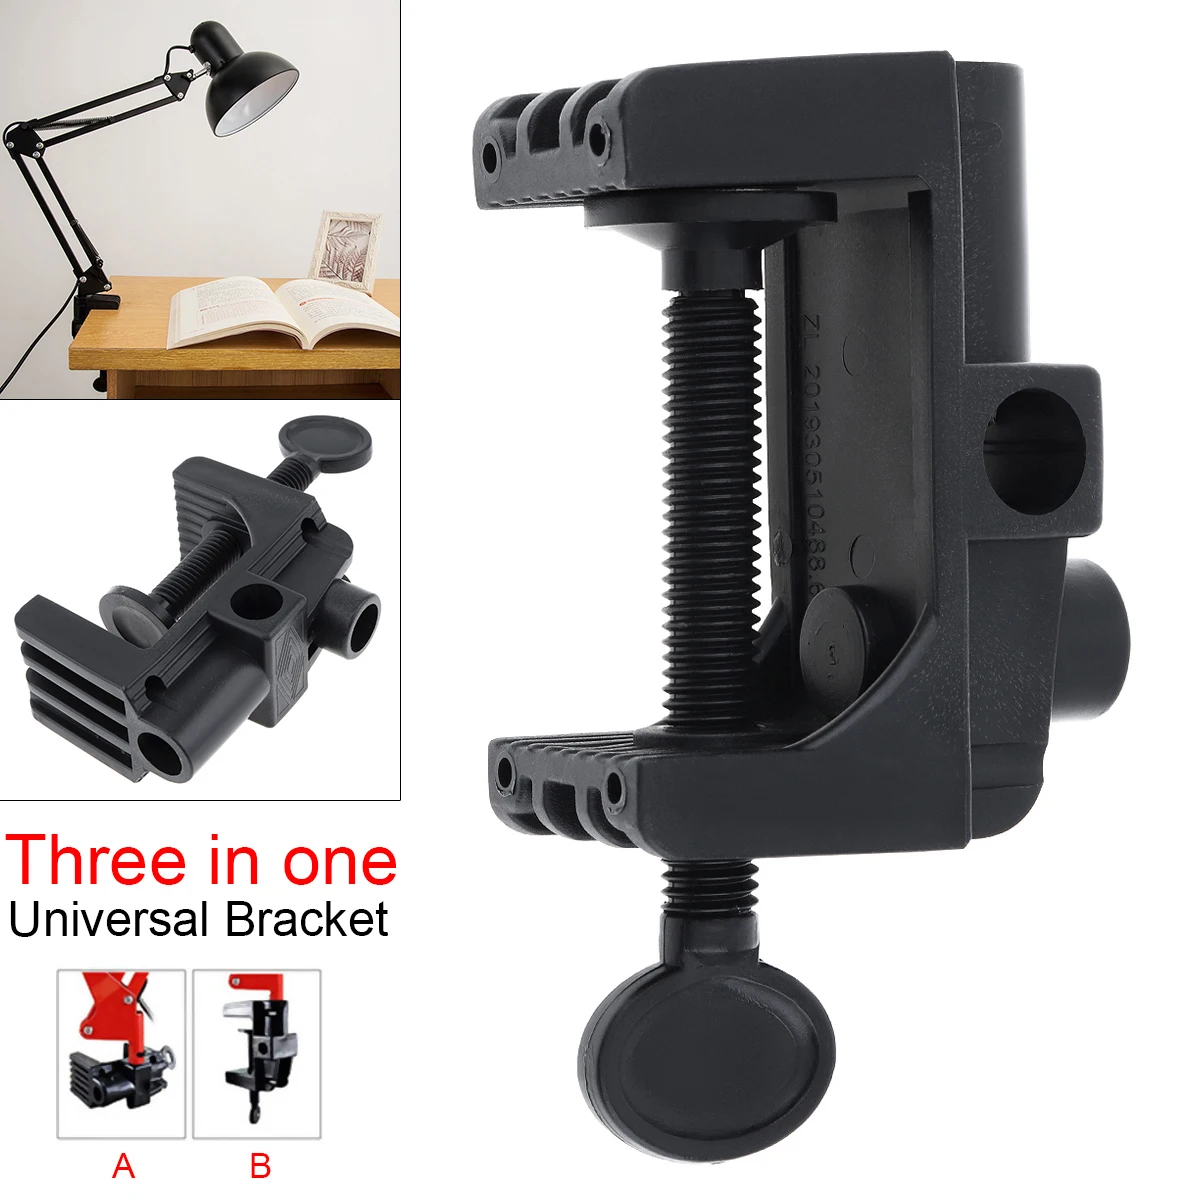 Desk Lamp Mount Holder C-Shape Made of Plastic DIY Fixed Clip for Table Light / Microphone / Camera hd 5mp 25mm cctv lens 1 2 fixed iris ir infrared m12 0 5 view 70m 90degrees angle mtv mount for ip camera